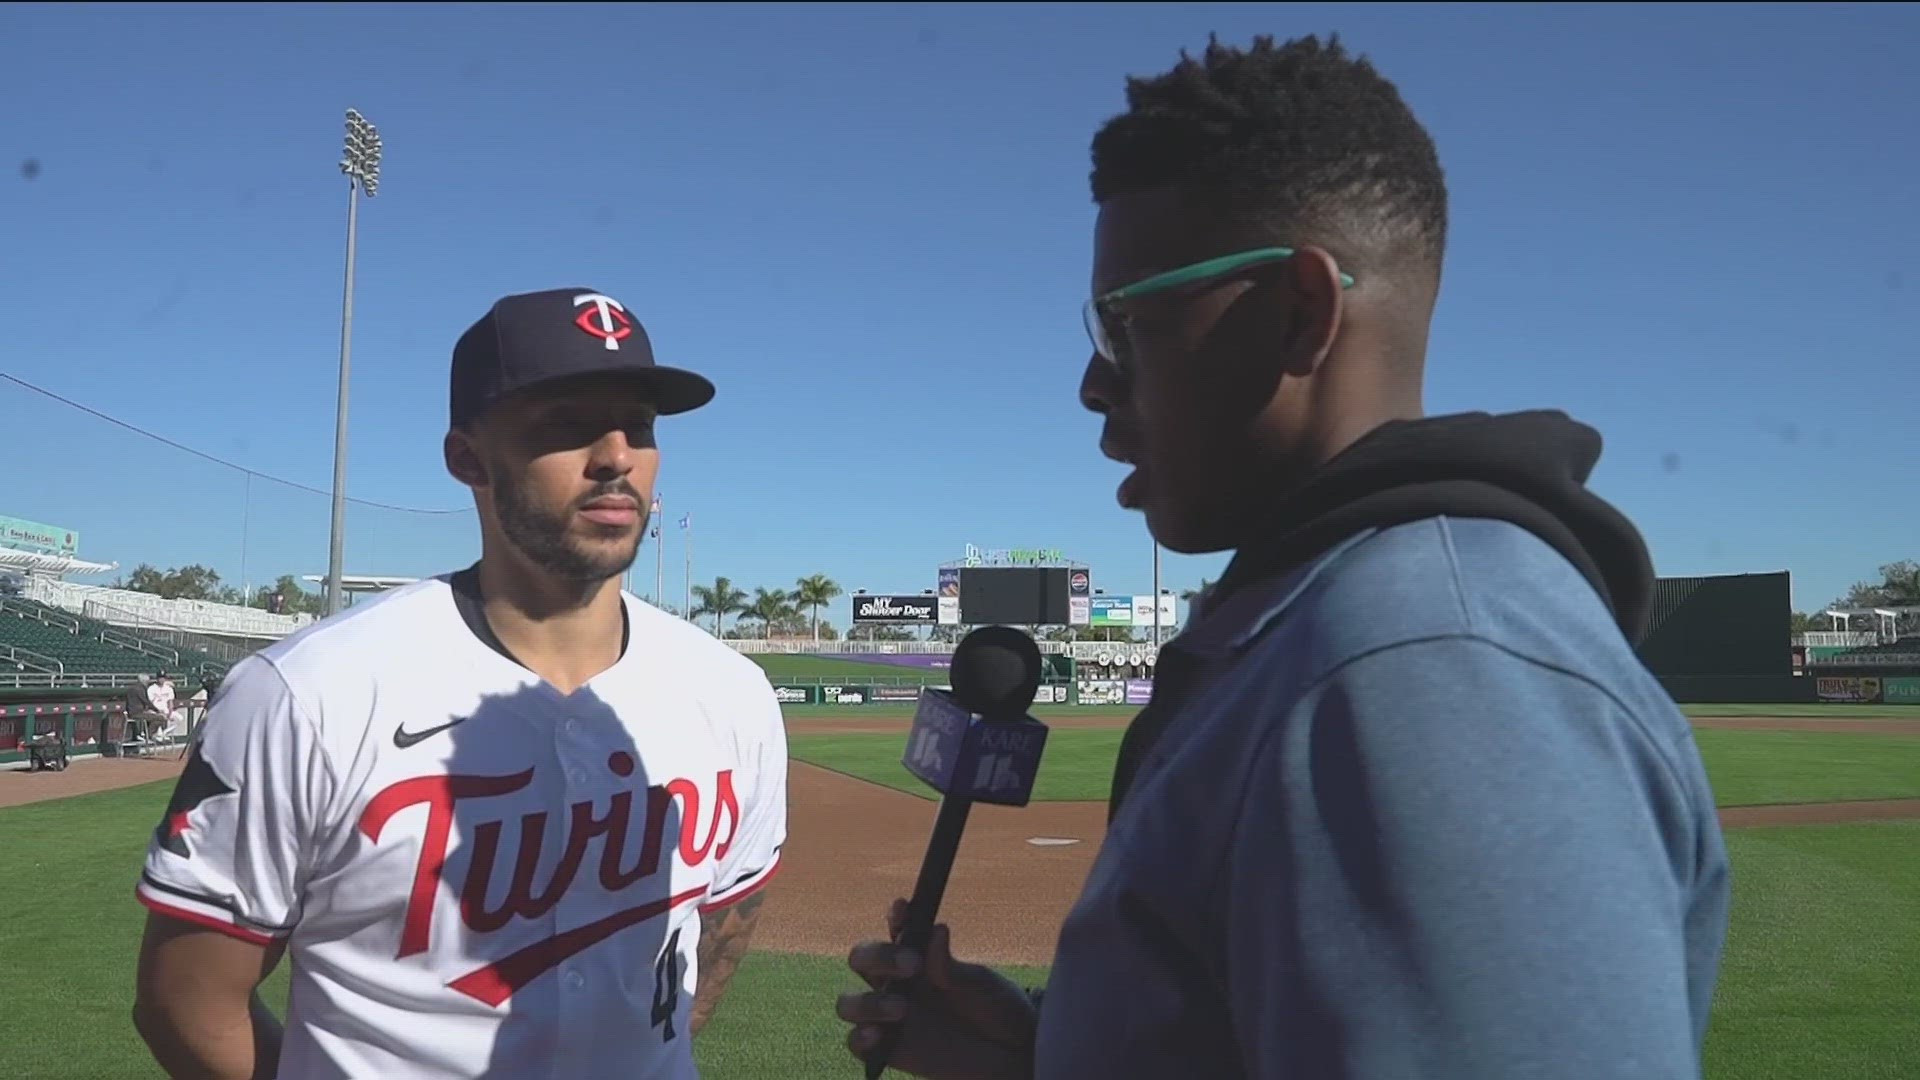 Carlos Correa talks with KARE 11's Reggie Wilson about the upcoming season and the pieces they have in place.